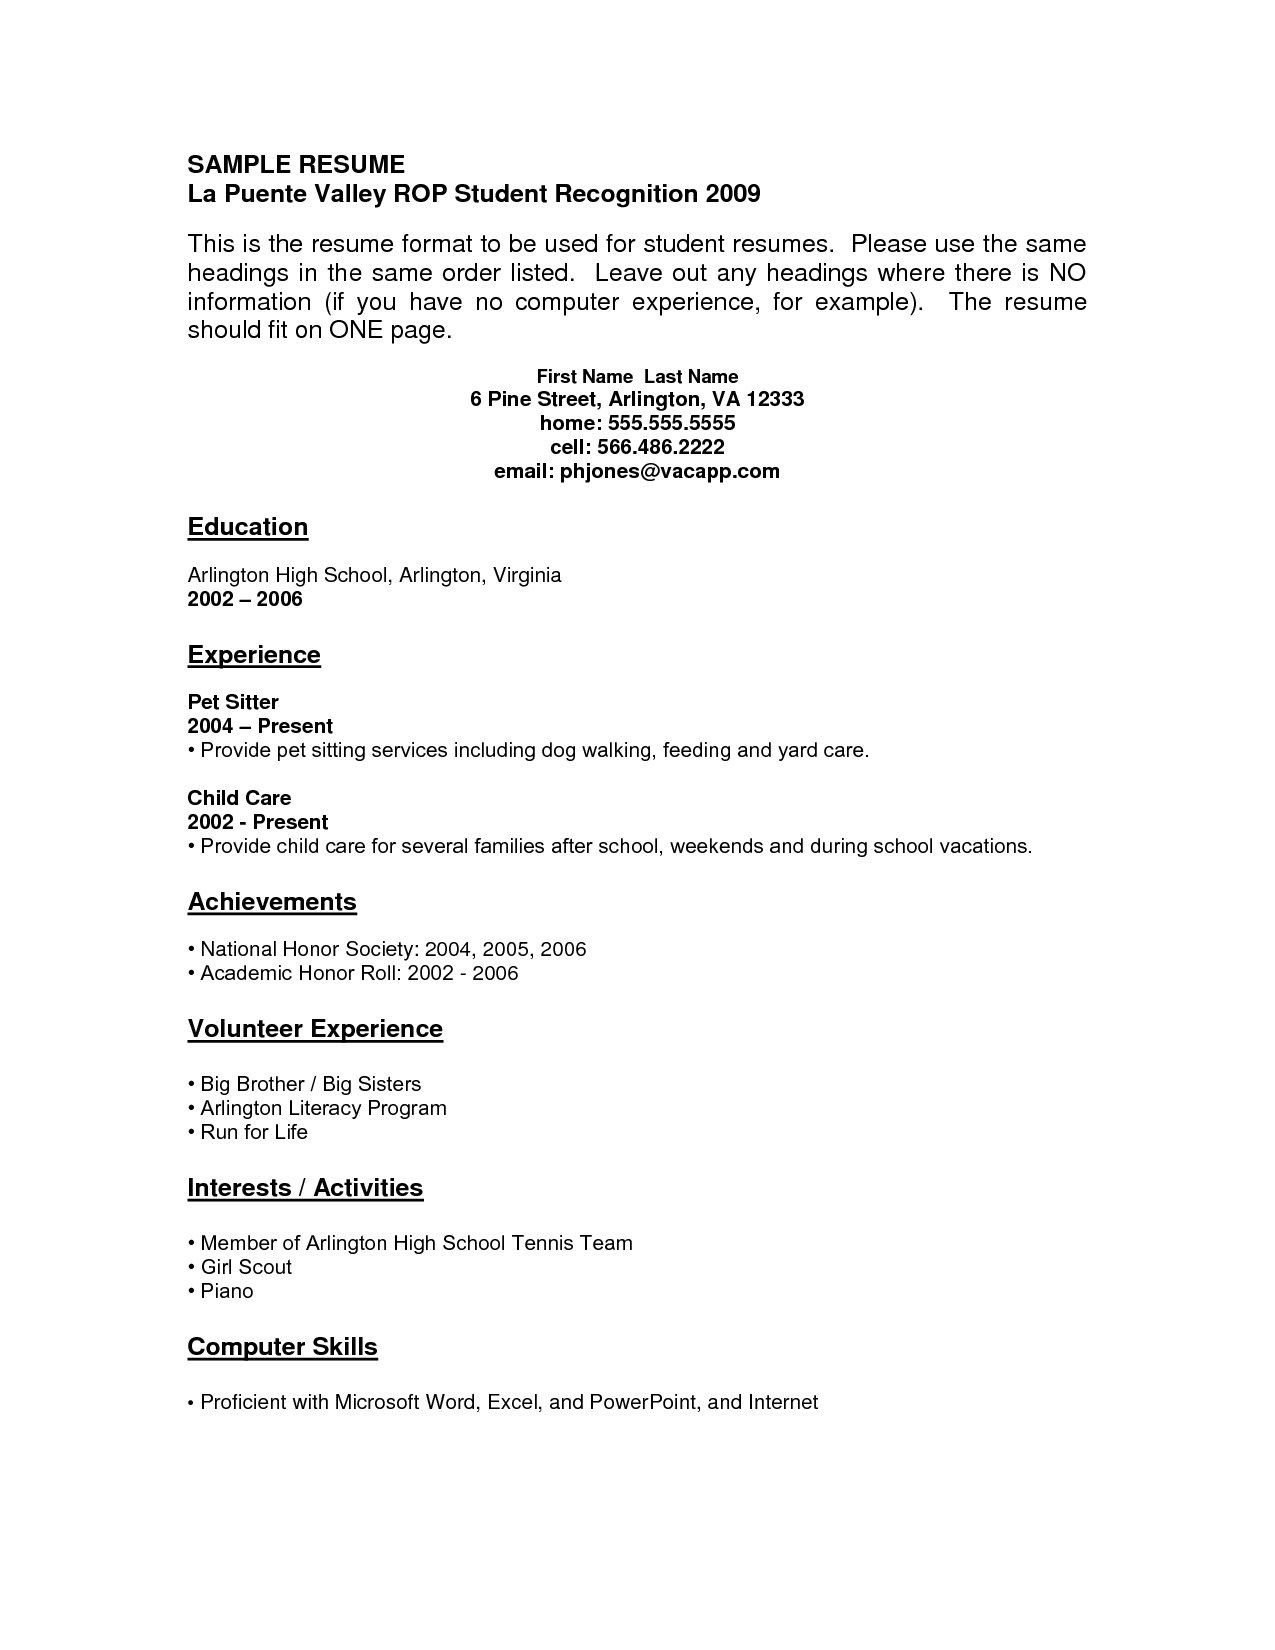 Sample Resume Objectives with No Work Experience Resume Examples with No Job Experience – Resume Templates Job …